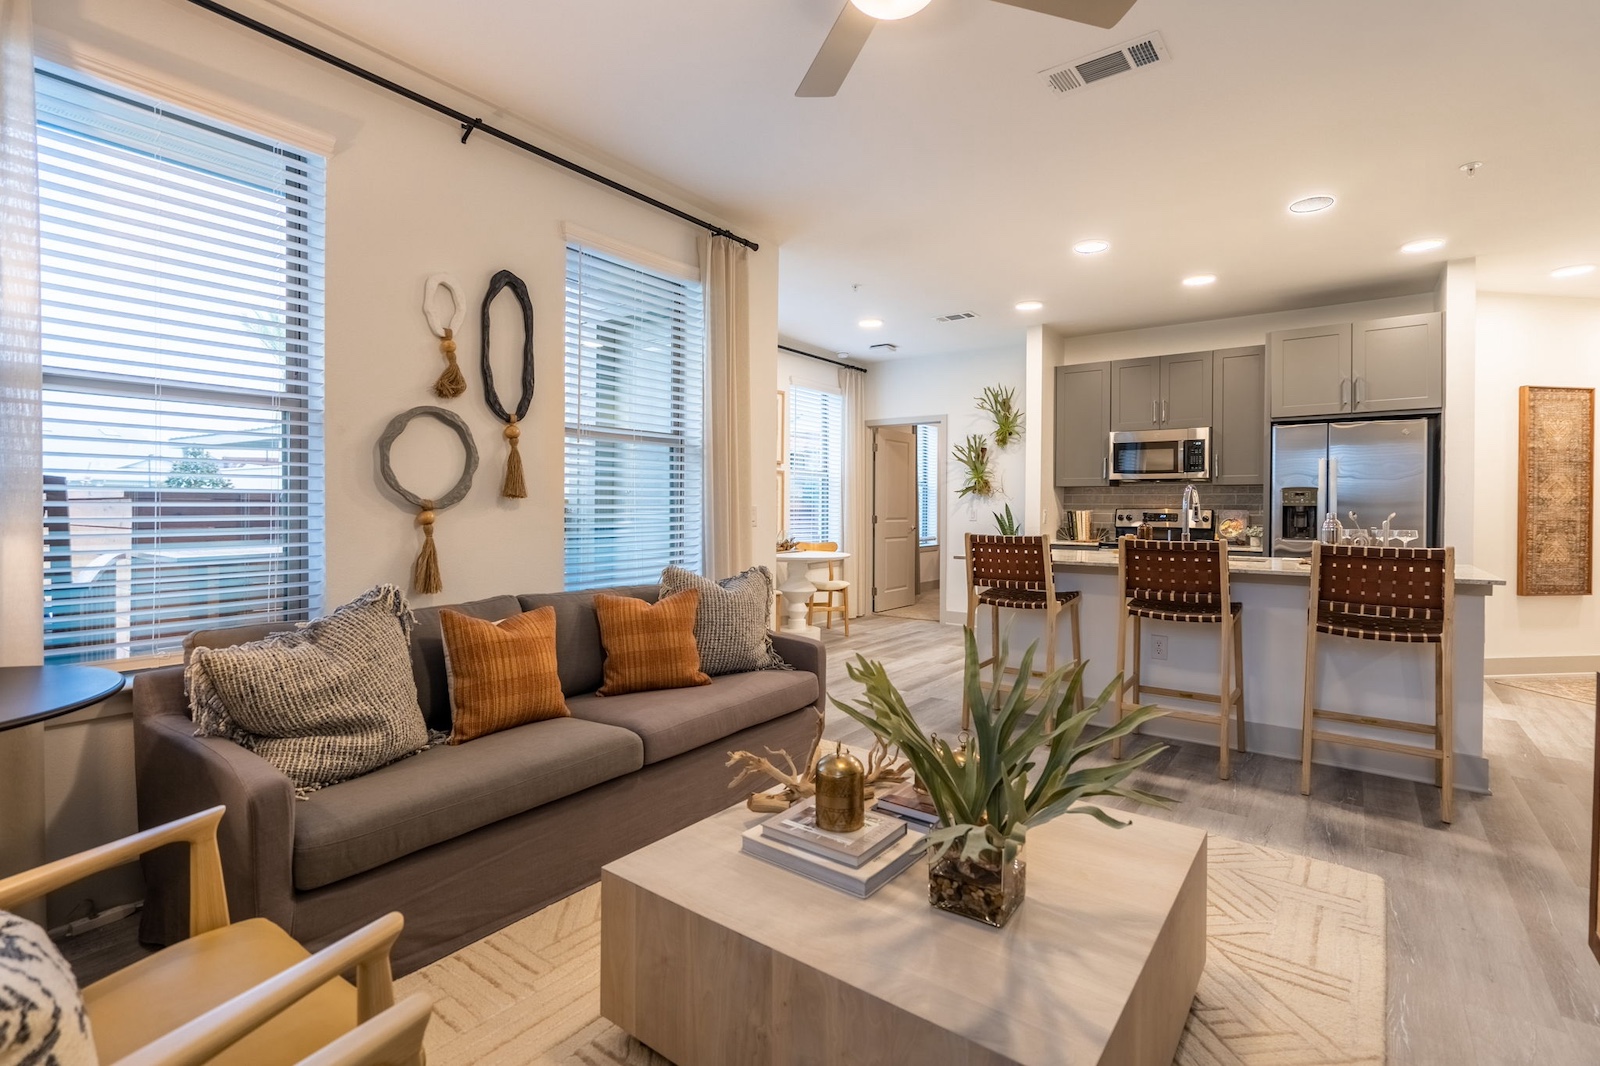 Kitchen and living room with wood-style plank flooring at our apartments near Cypress. Residences